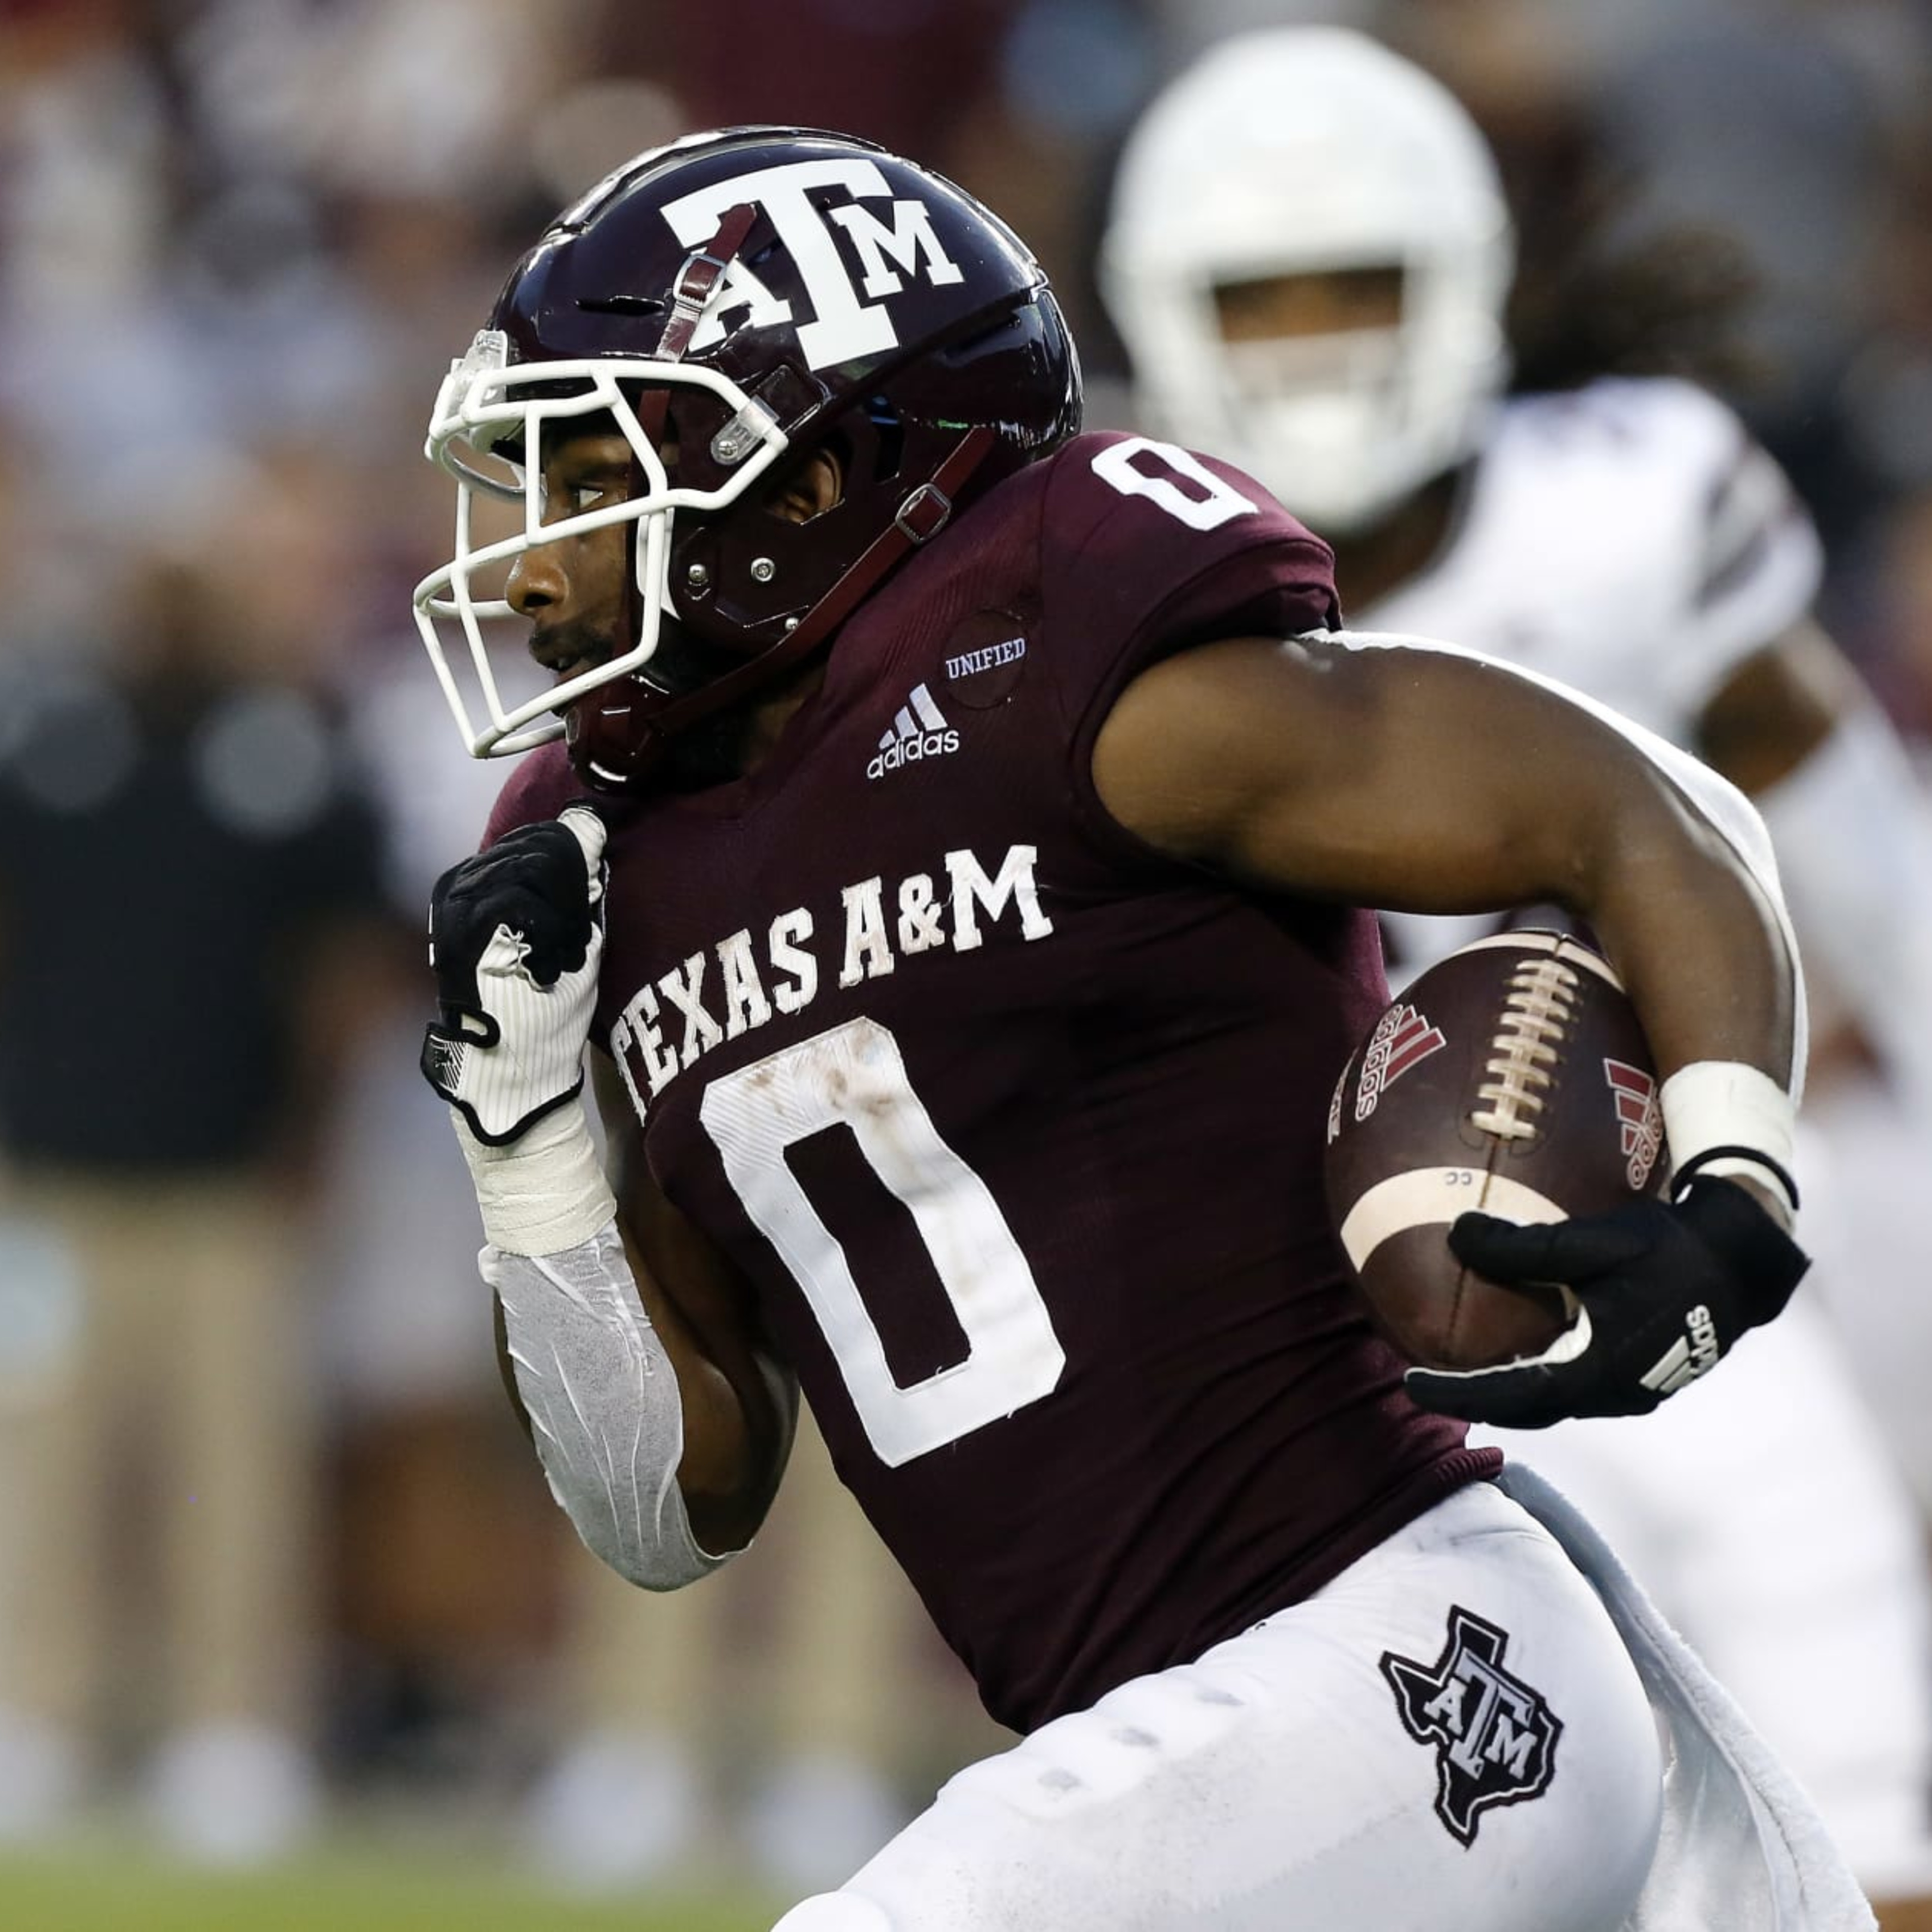 Texas A&M WR Ainias Smith Suspended After Arrest on DWI, Weapons, Marijuana Charges